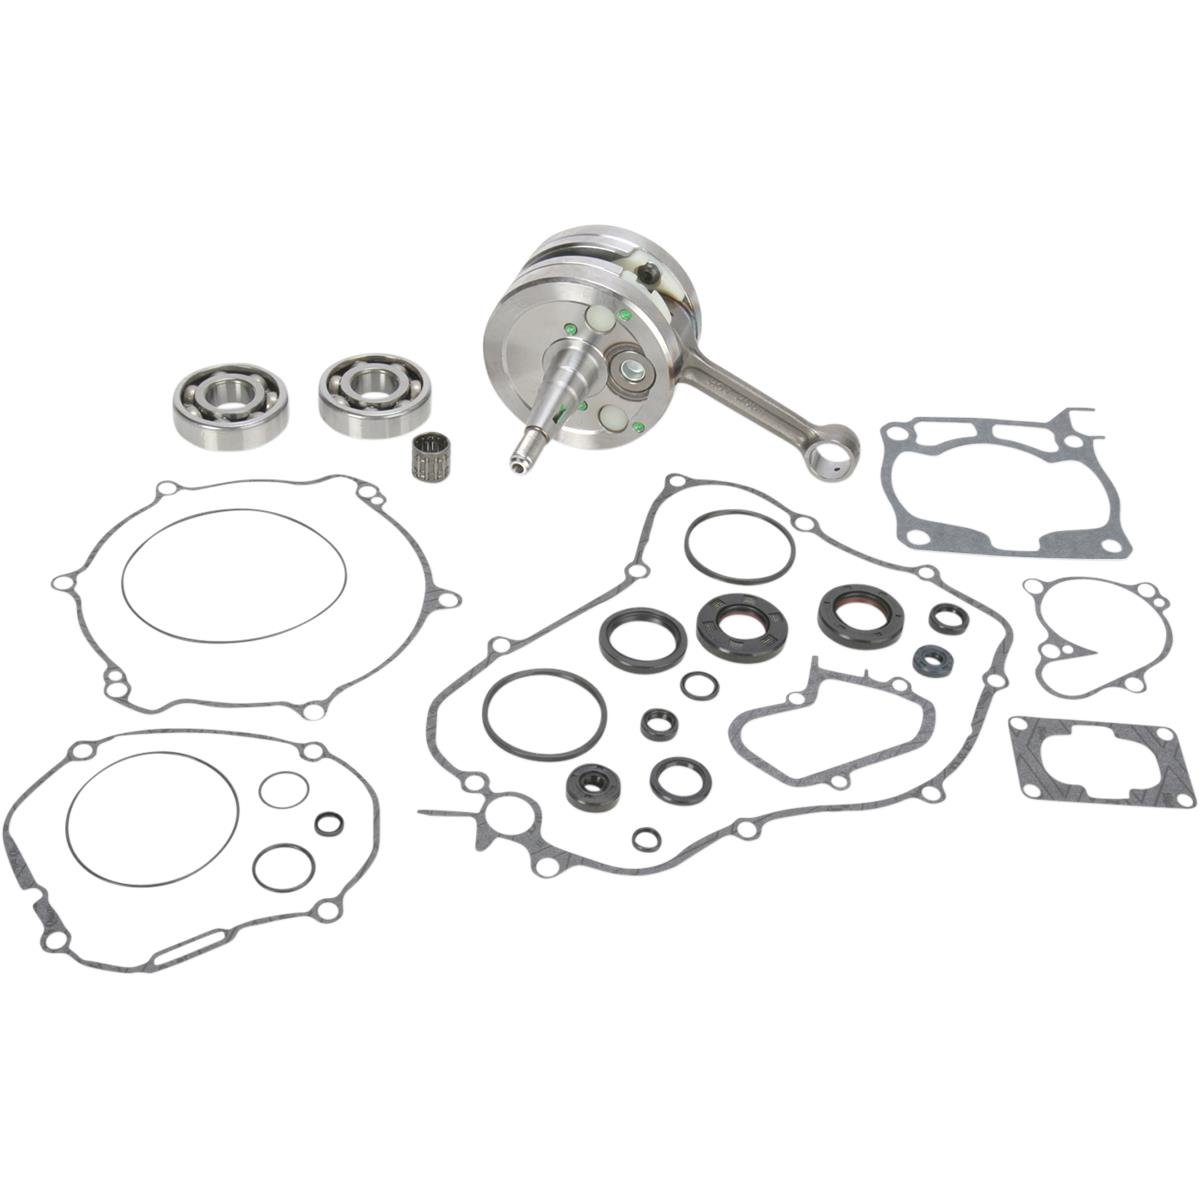 Hot Rods Products Kit Vilebrequin  Yamaha YZ 125 05-21, Fantic XX/XE 125 22-